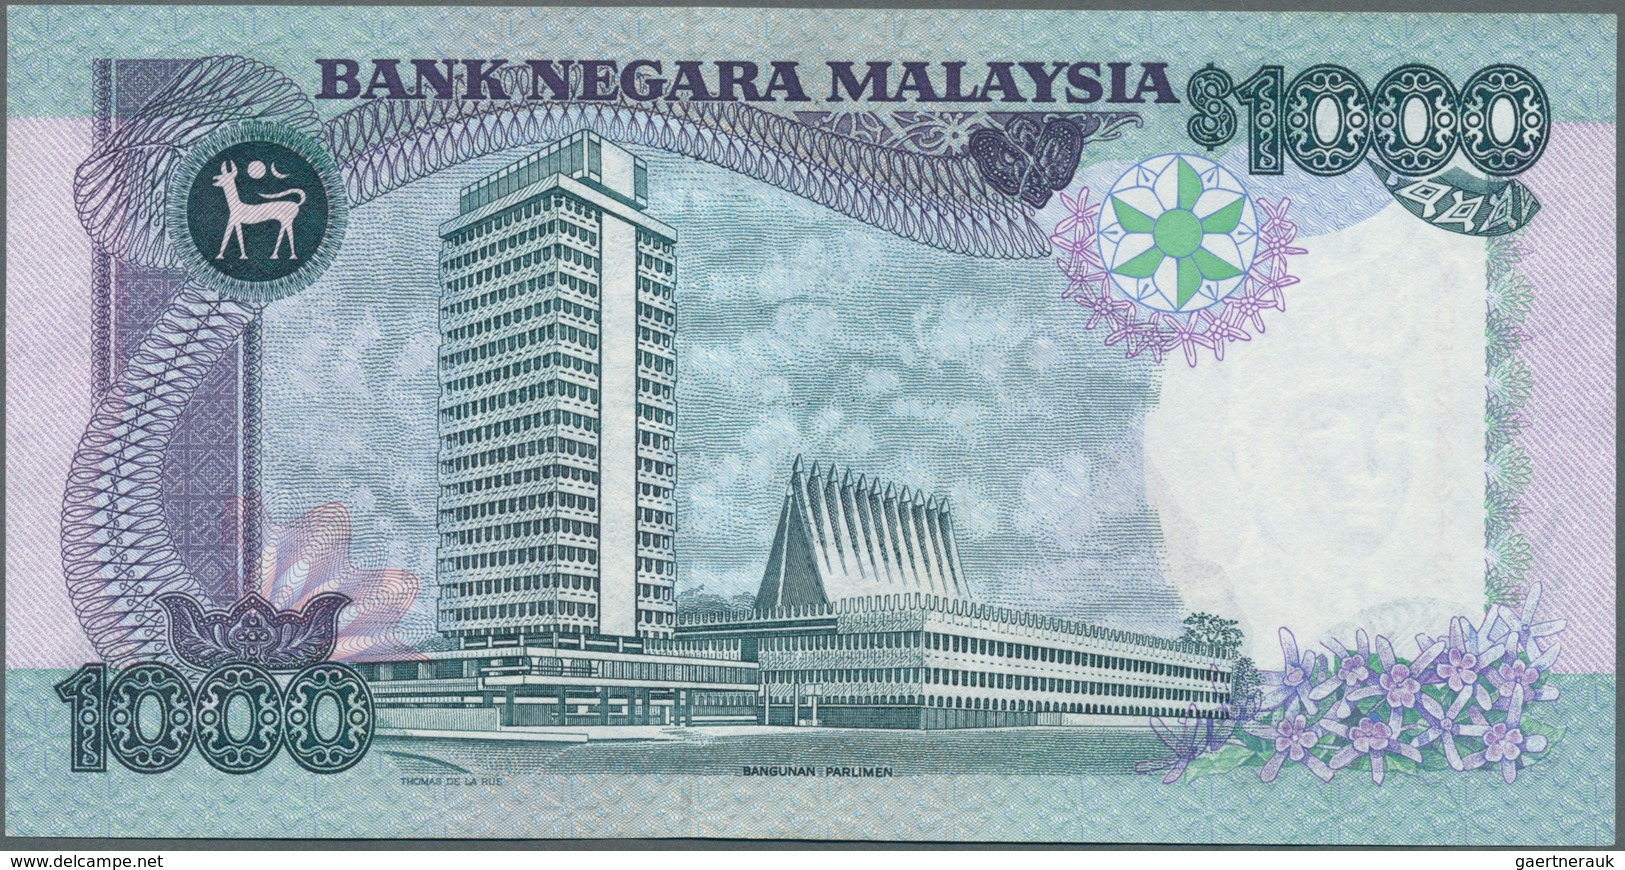 01994 Malaysia: 1000 Ringgit ND P. 34, In Condition: AUNC. - Maleisië